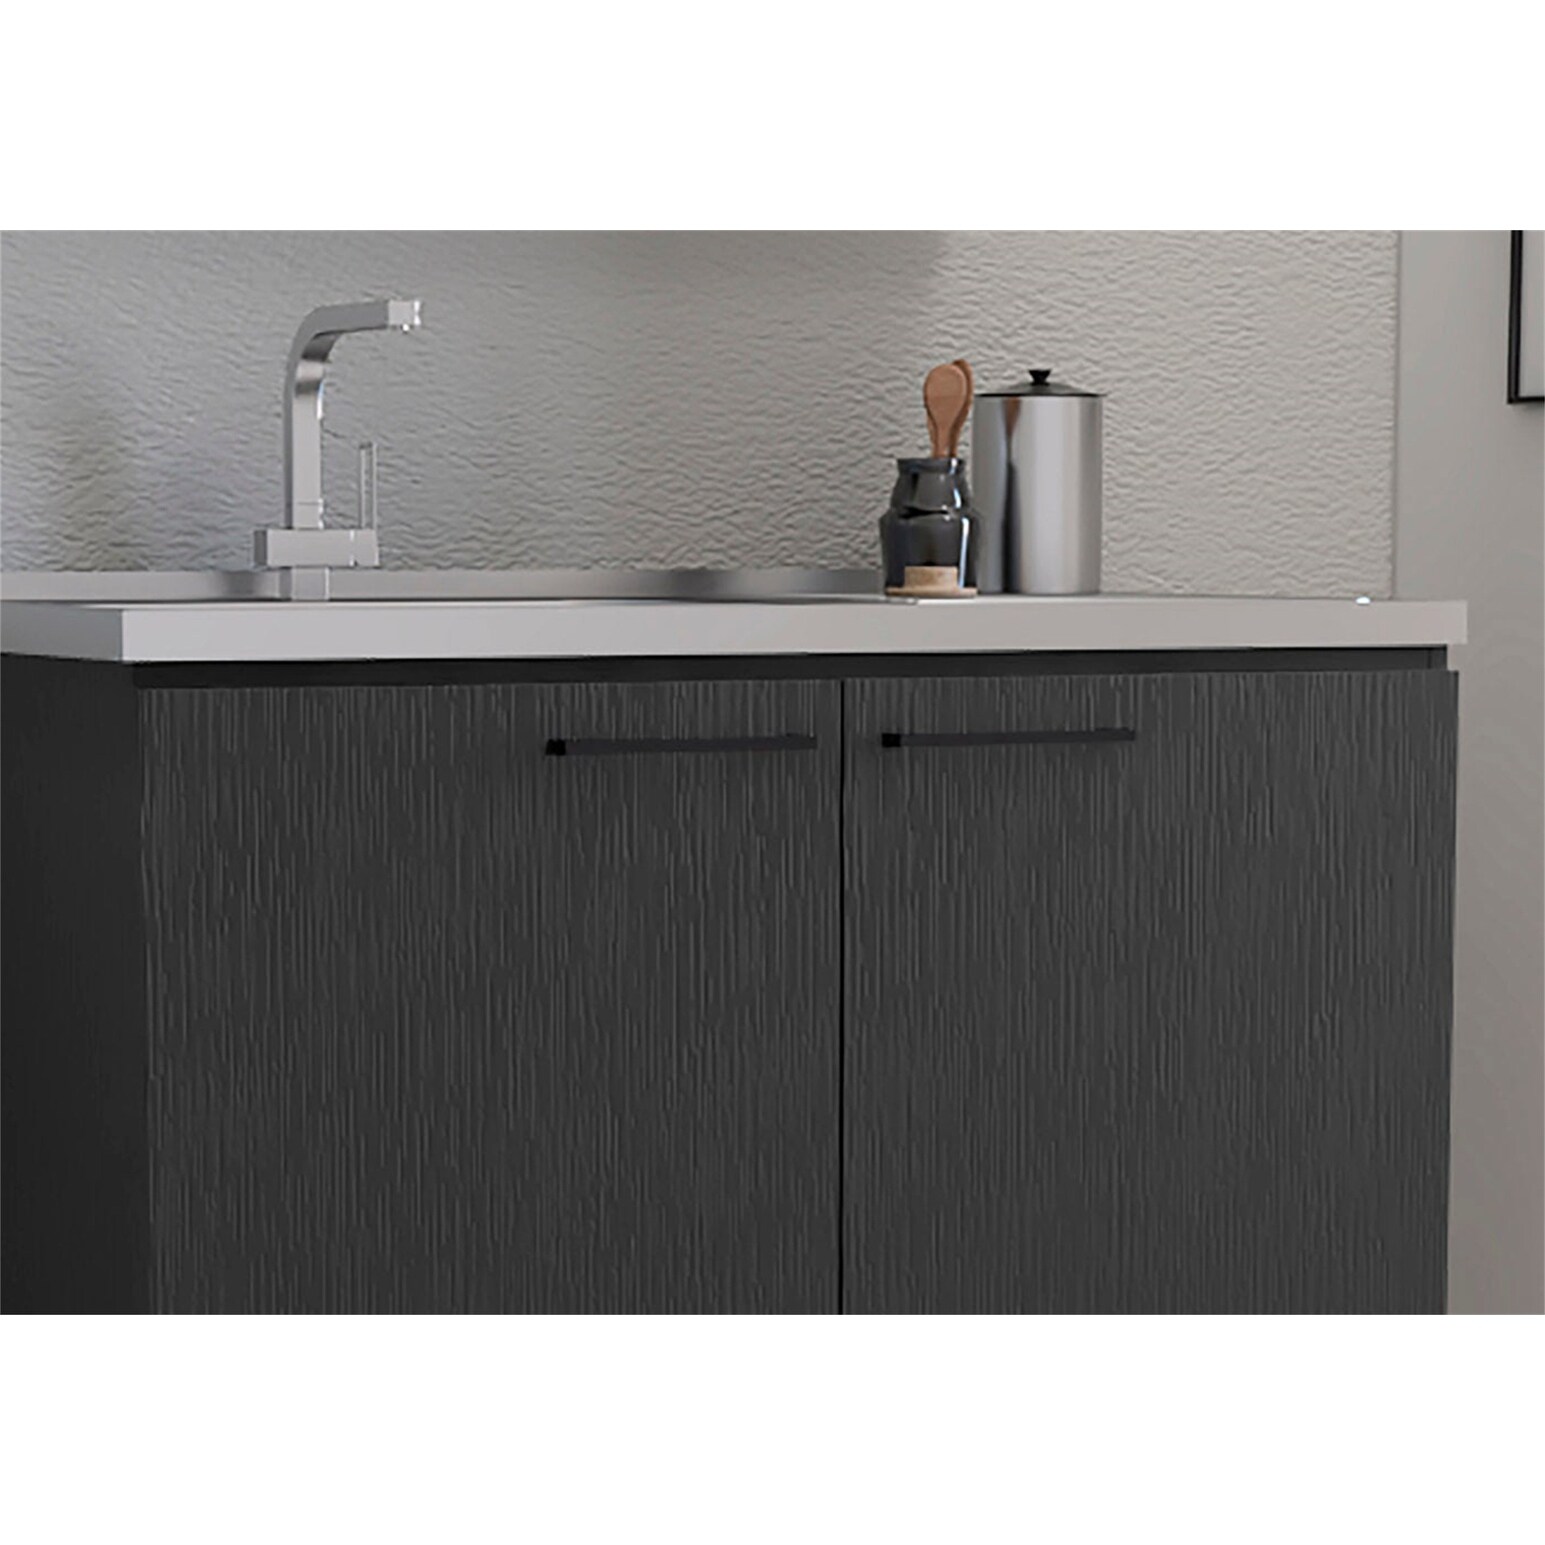 Utility Sink with Cabinet, Stainless Steel Countertop, Interior